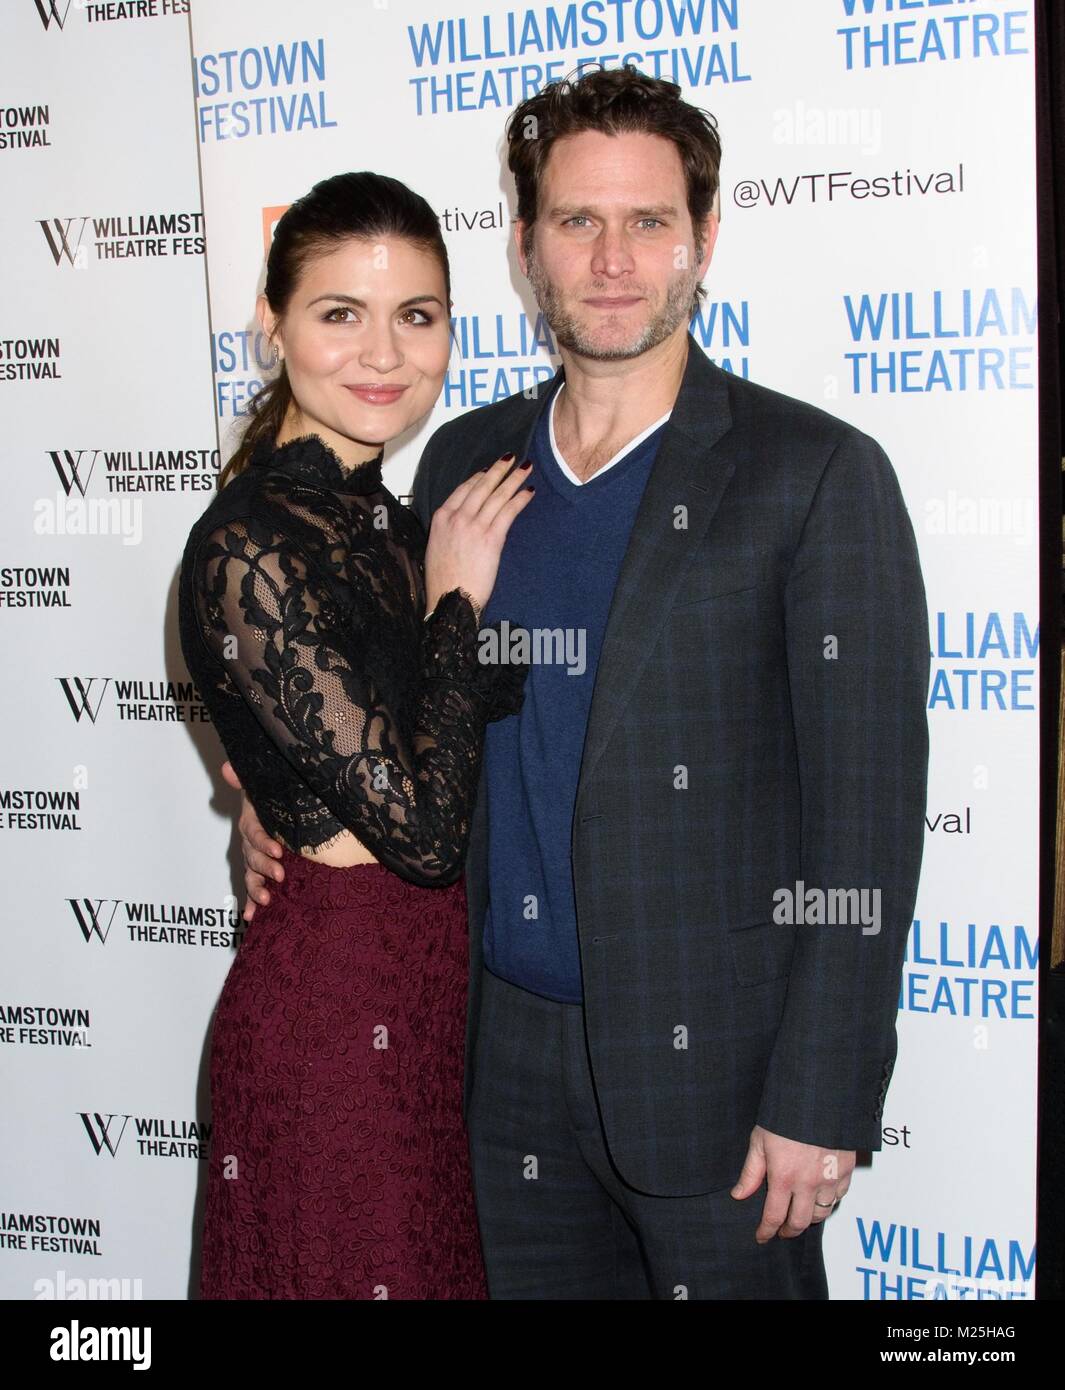 New York, NY, USA. 5th Feb, 2018. Phillipa Soo, Steven Pasquale at arrivals for Williamstown Theatre Festival, Tao Downtown, New York, NY February 5, 2018. Credit: RCF/Everett Collection/Alamy Live News Stock Photo